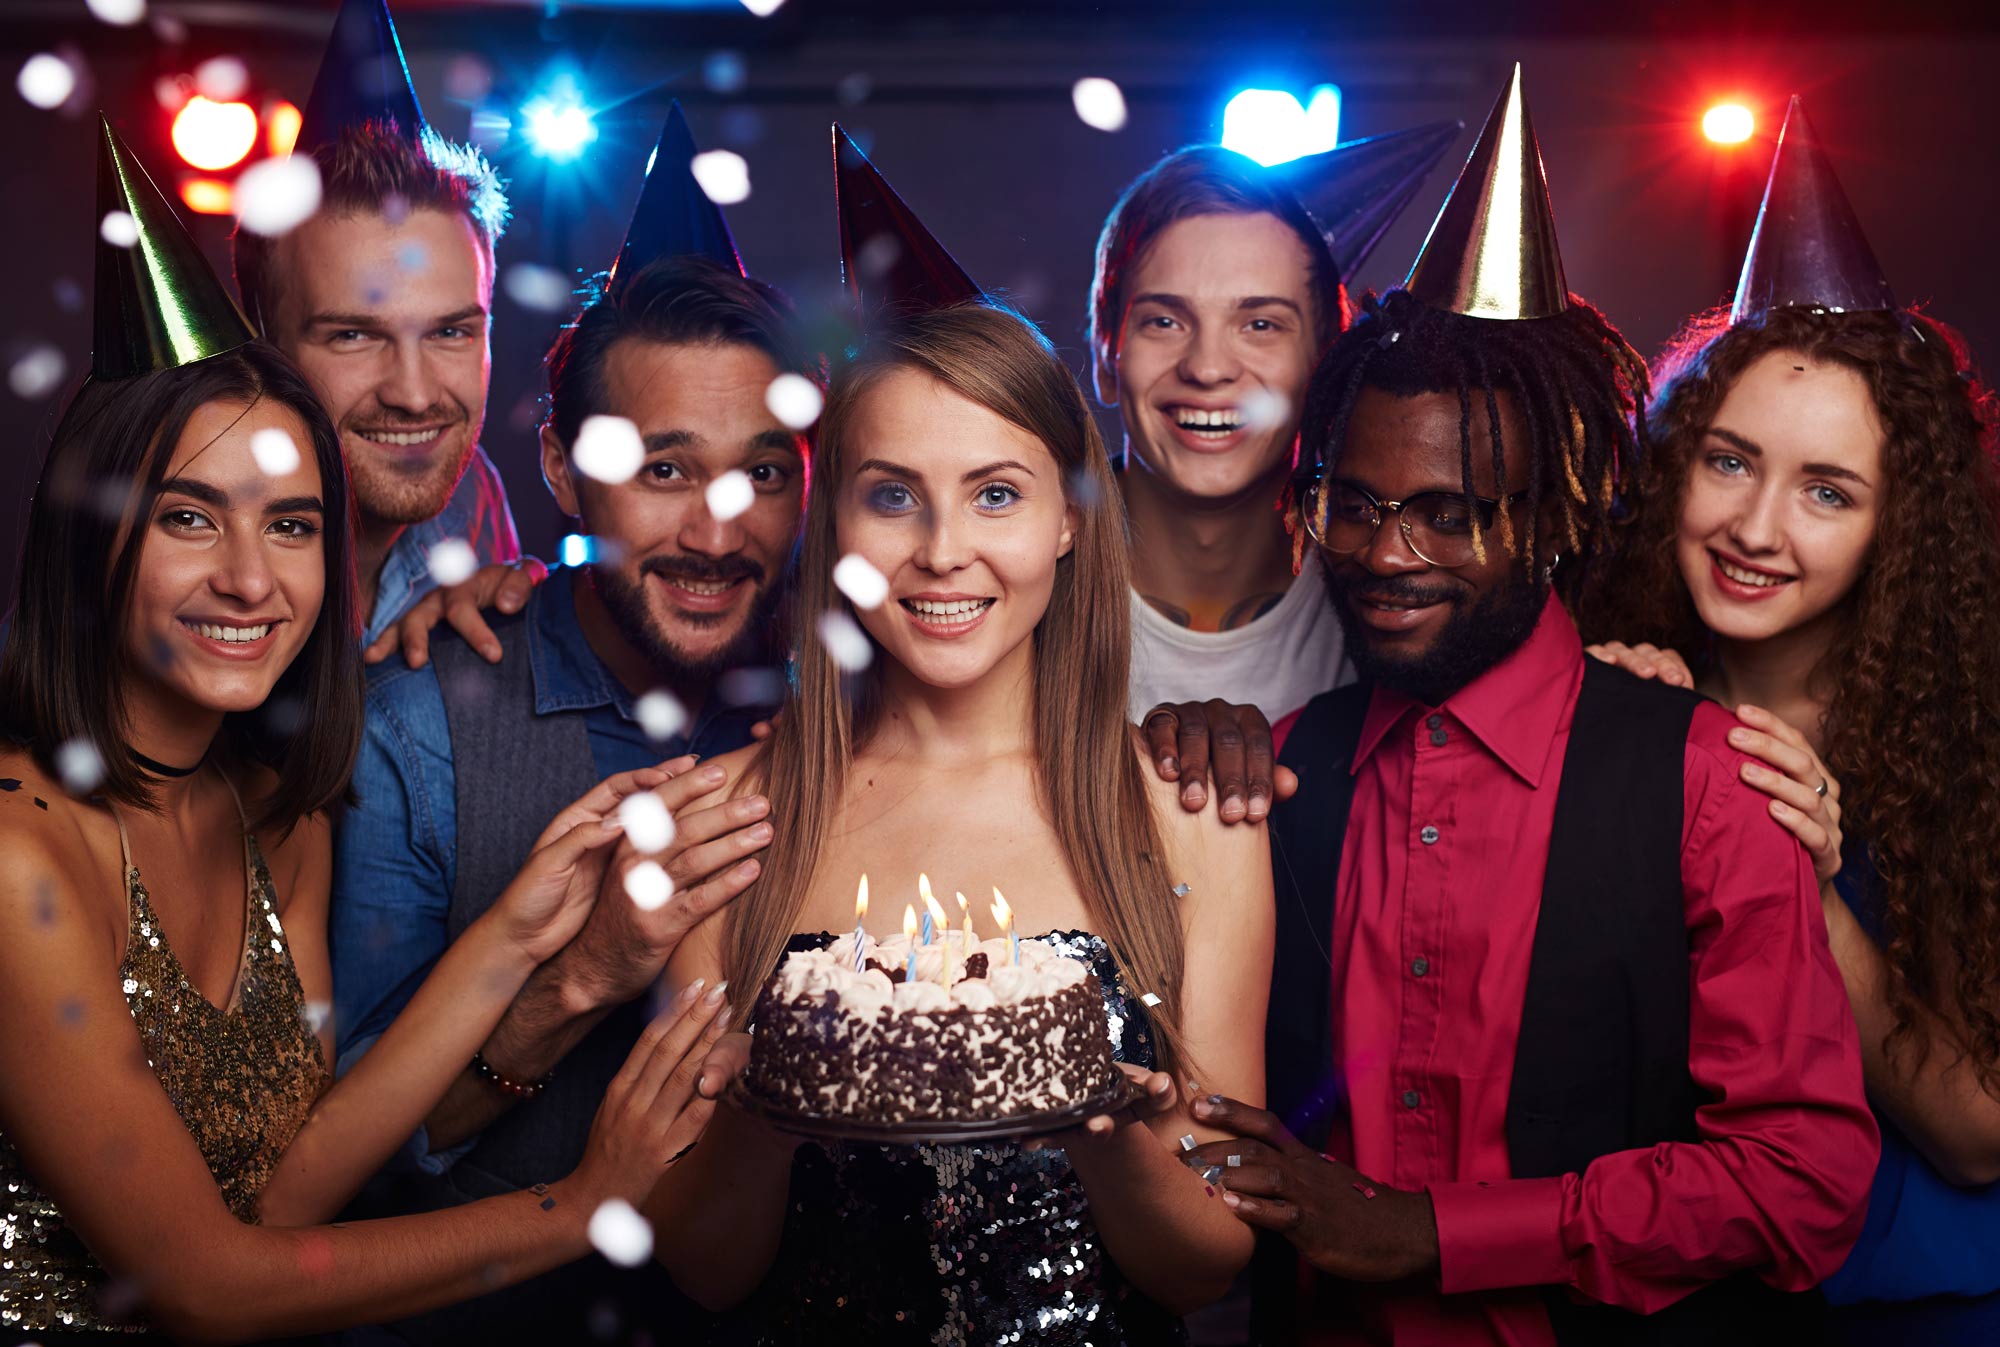 Birthday Party Images For Adults